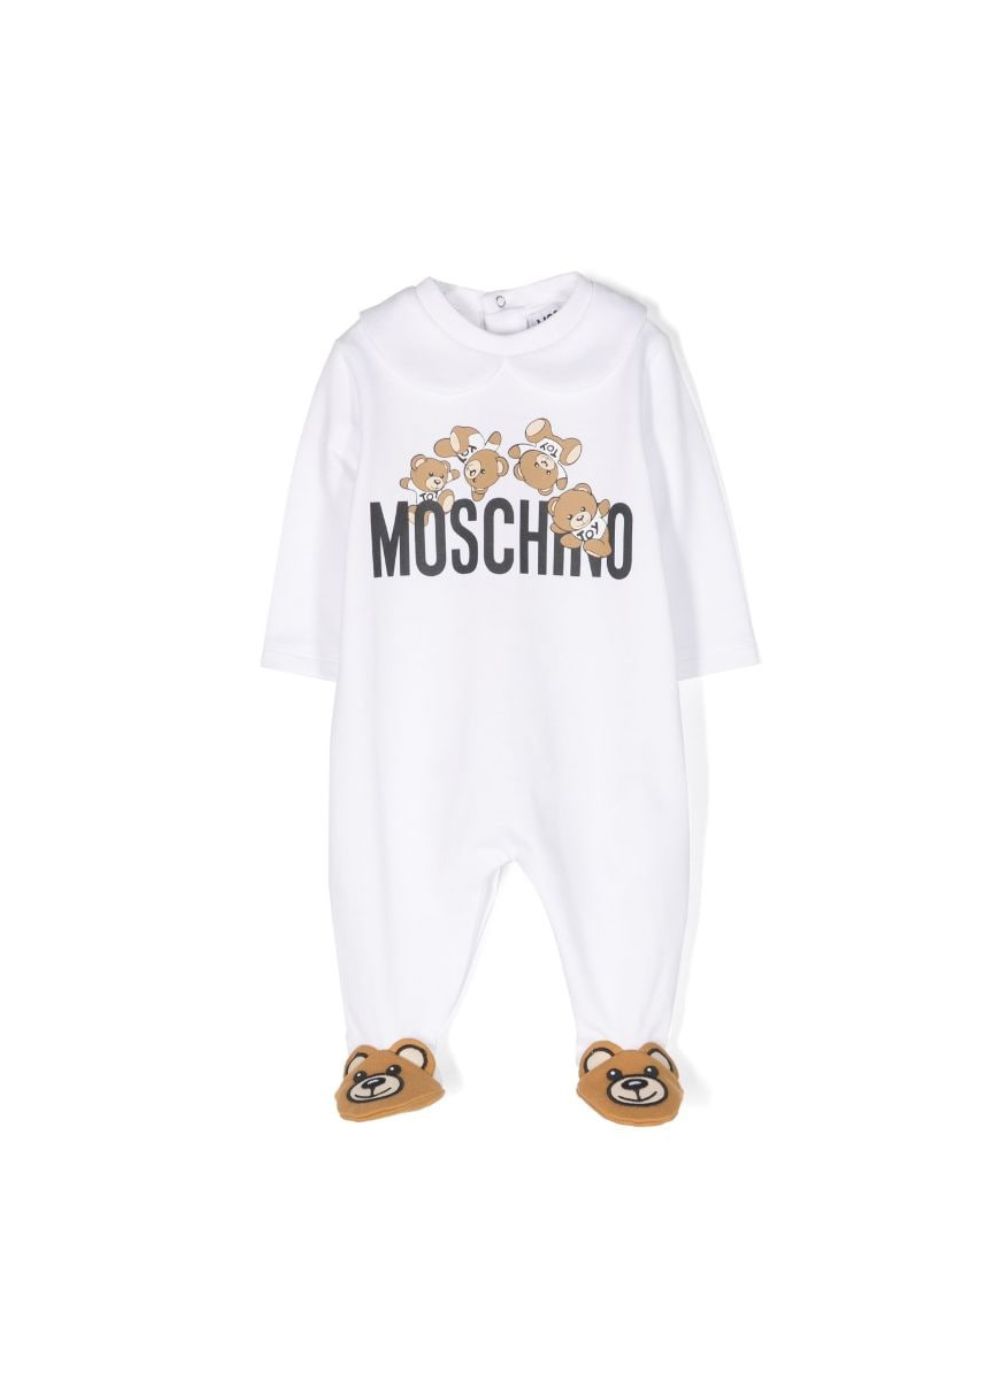 Featured image for “Moschino Tutina Teddy Bear”